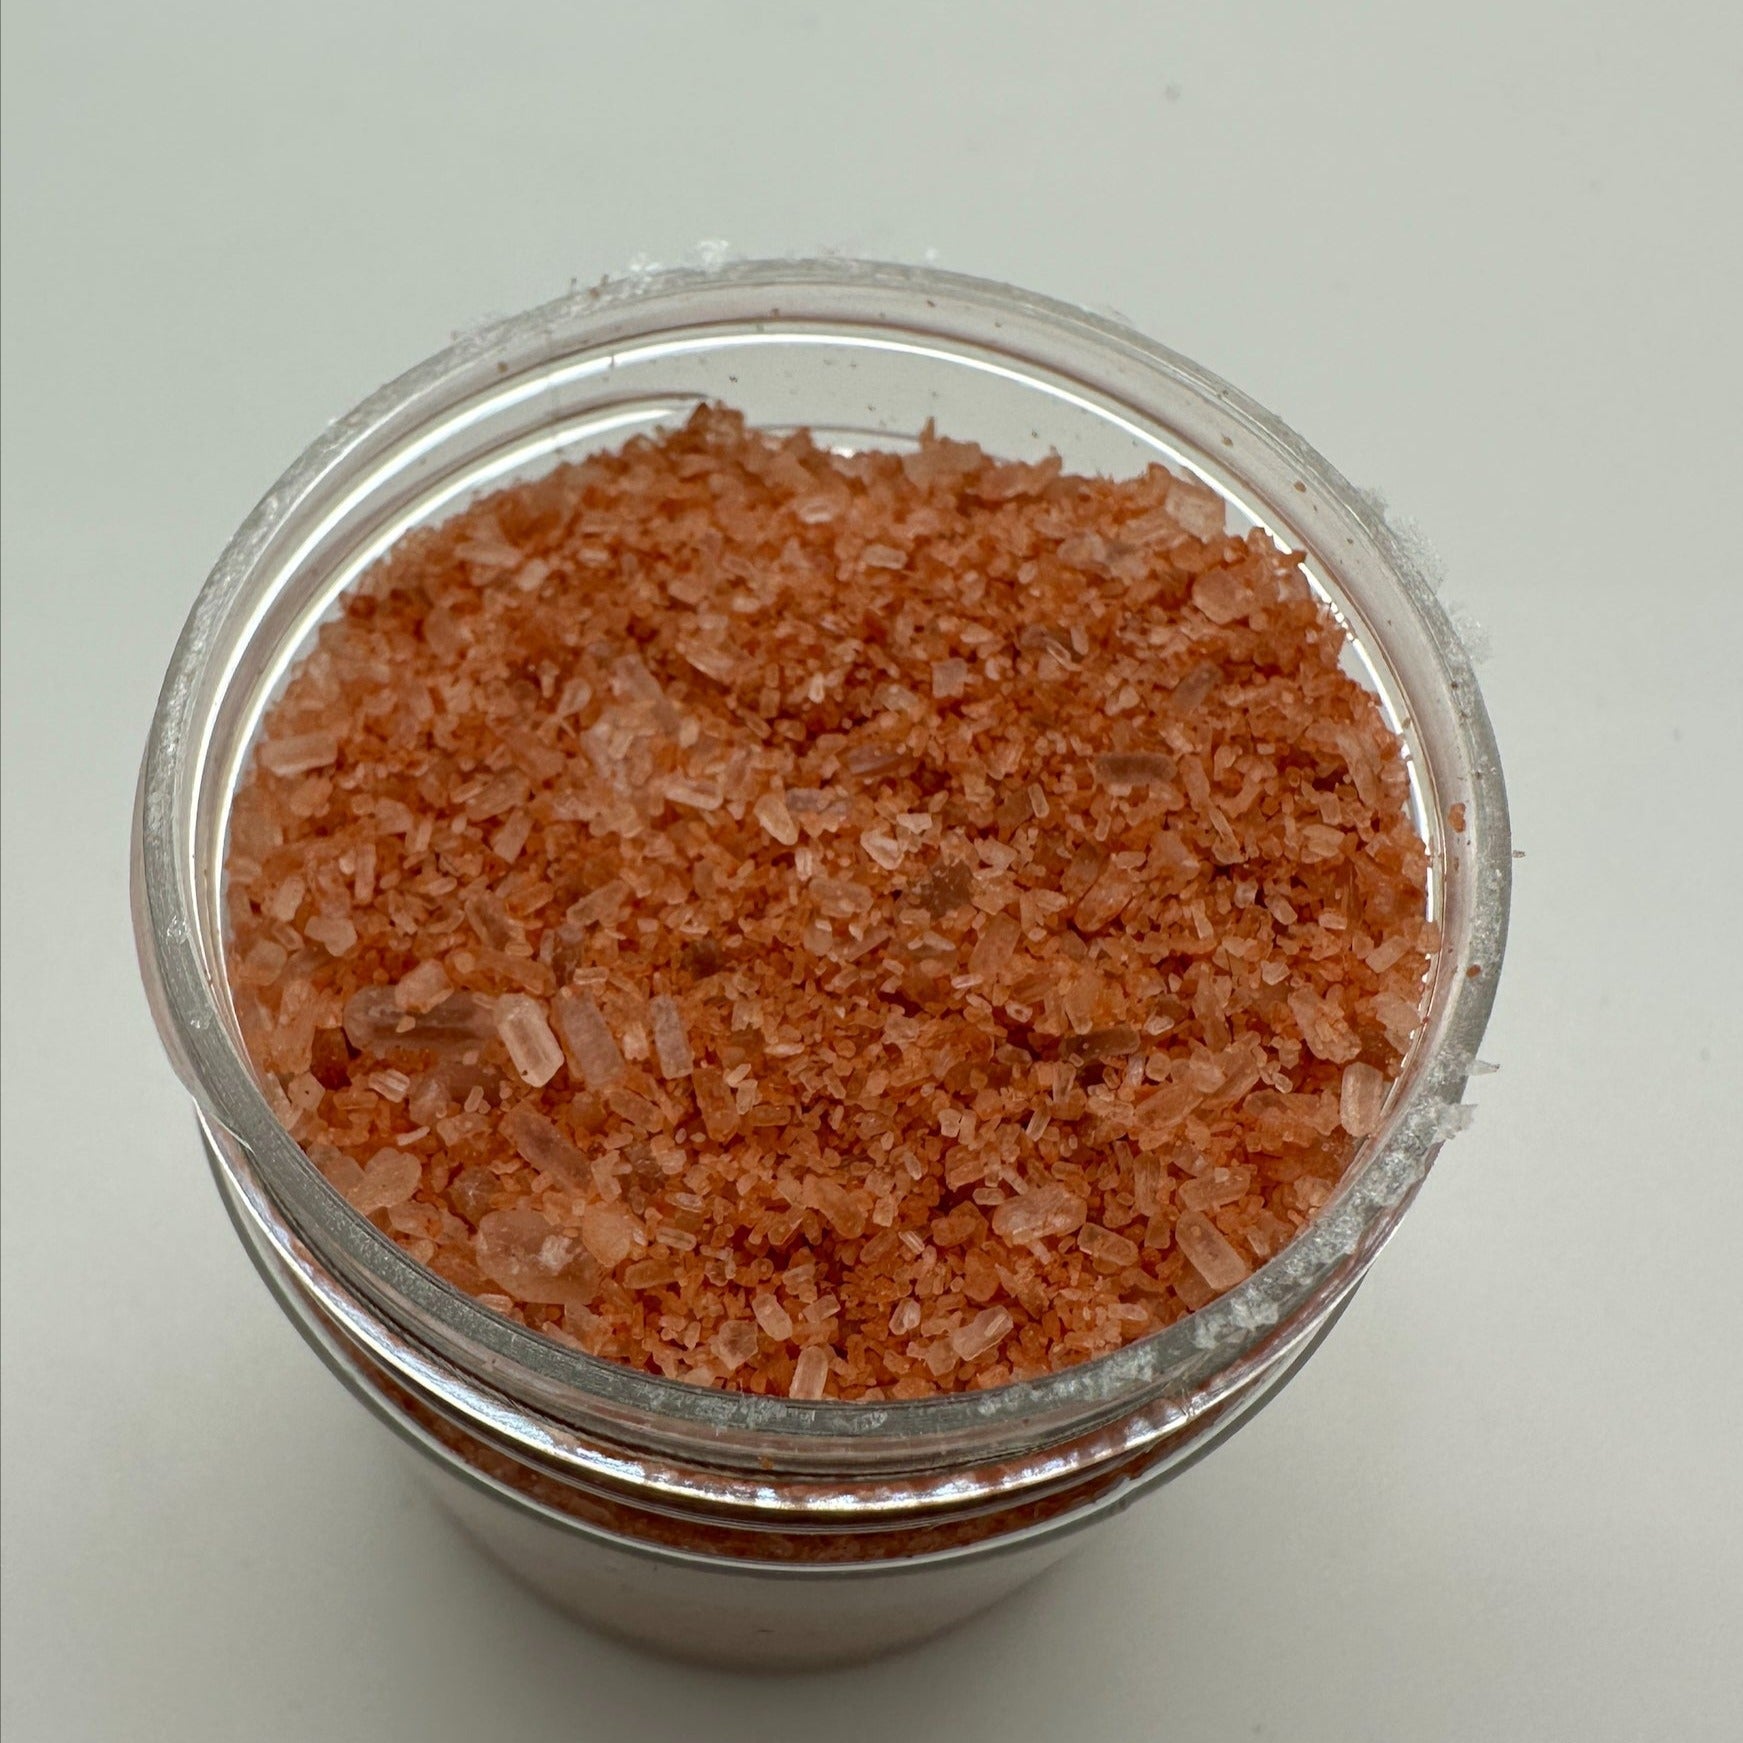 Red colored bath salts in a clear jar that is open.